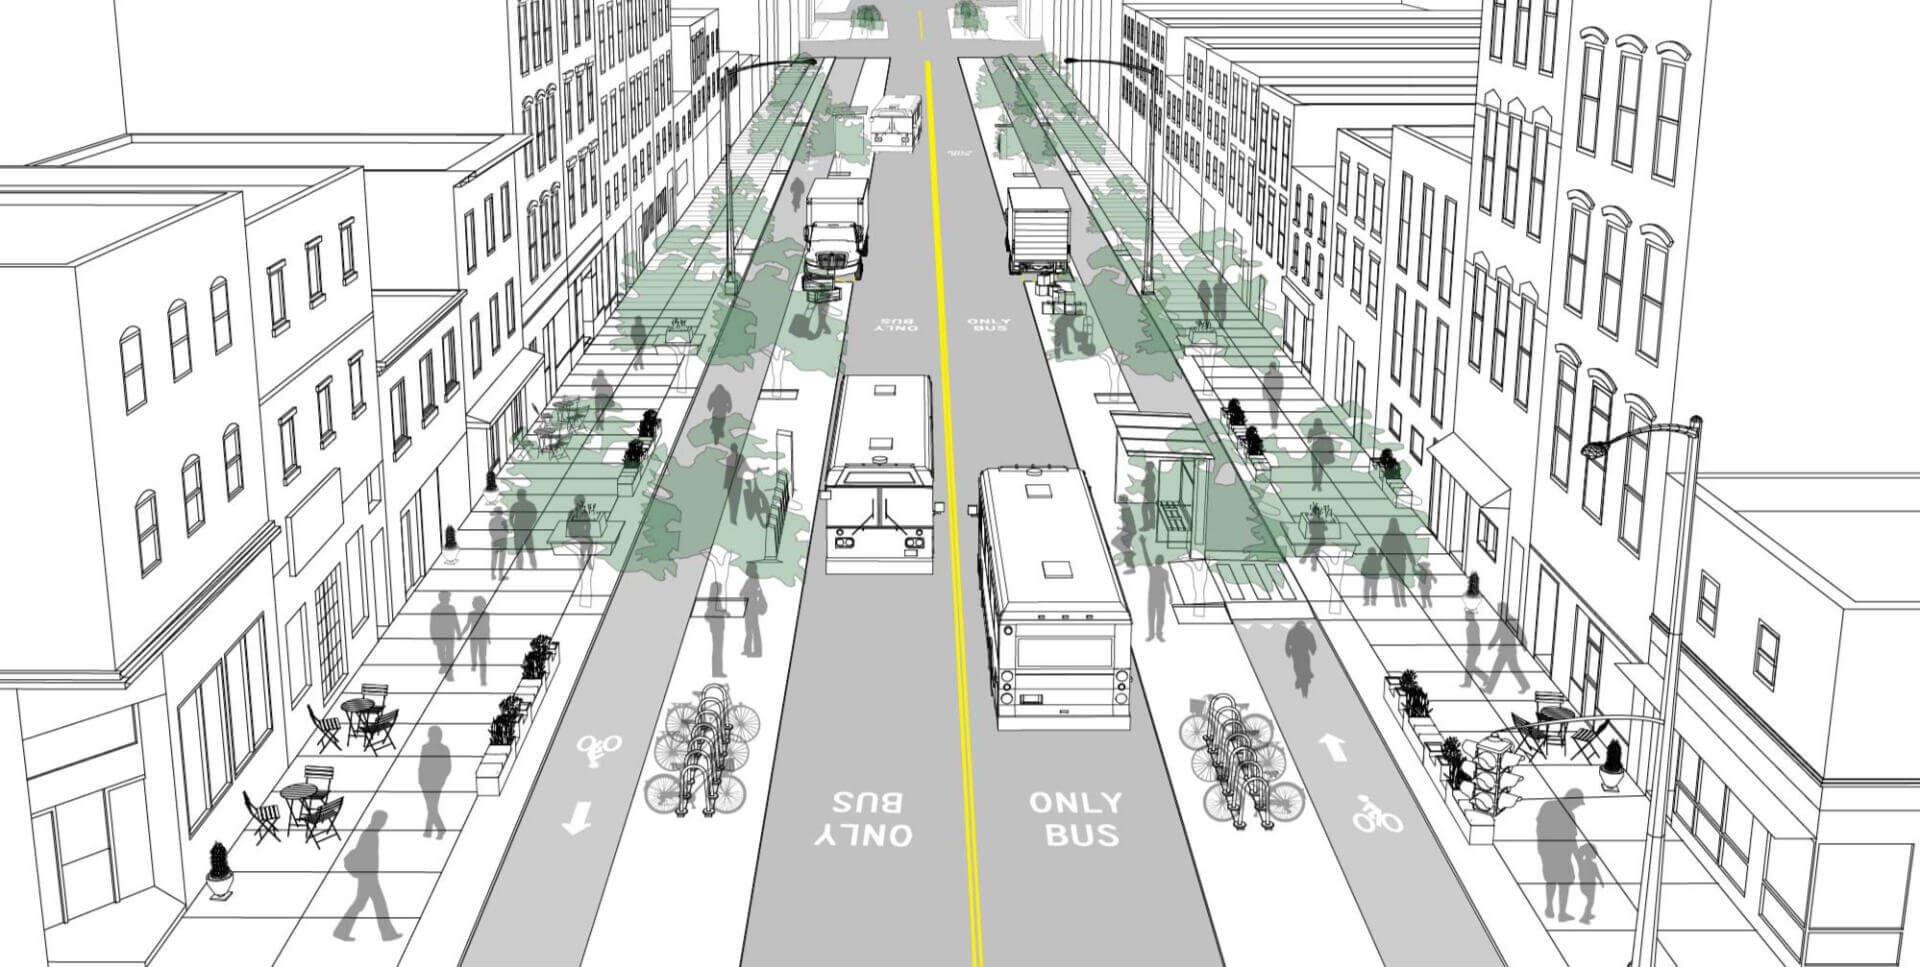 Artist rendering of a transformed city street with protected bike lanes protected by medians with bike parking, dedicated busways, trees, wide and comfortable sidewalks with public seating.